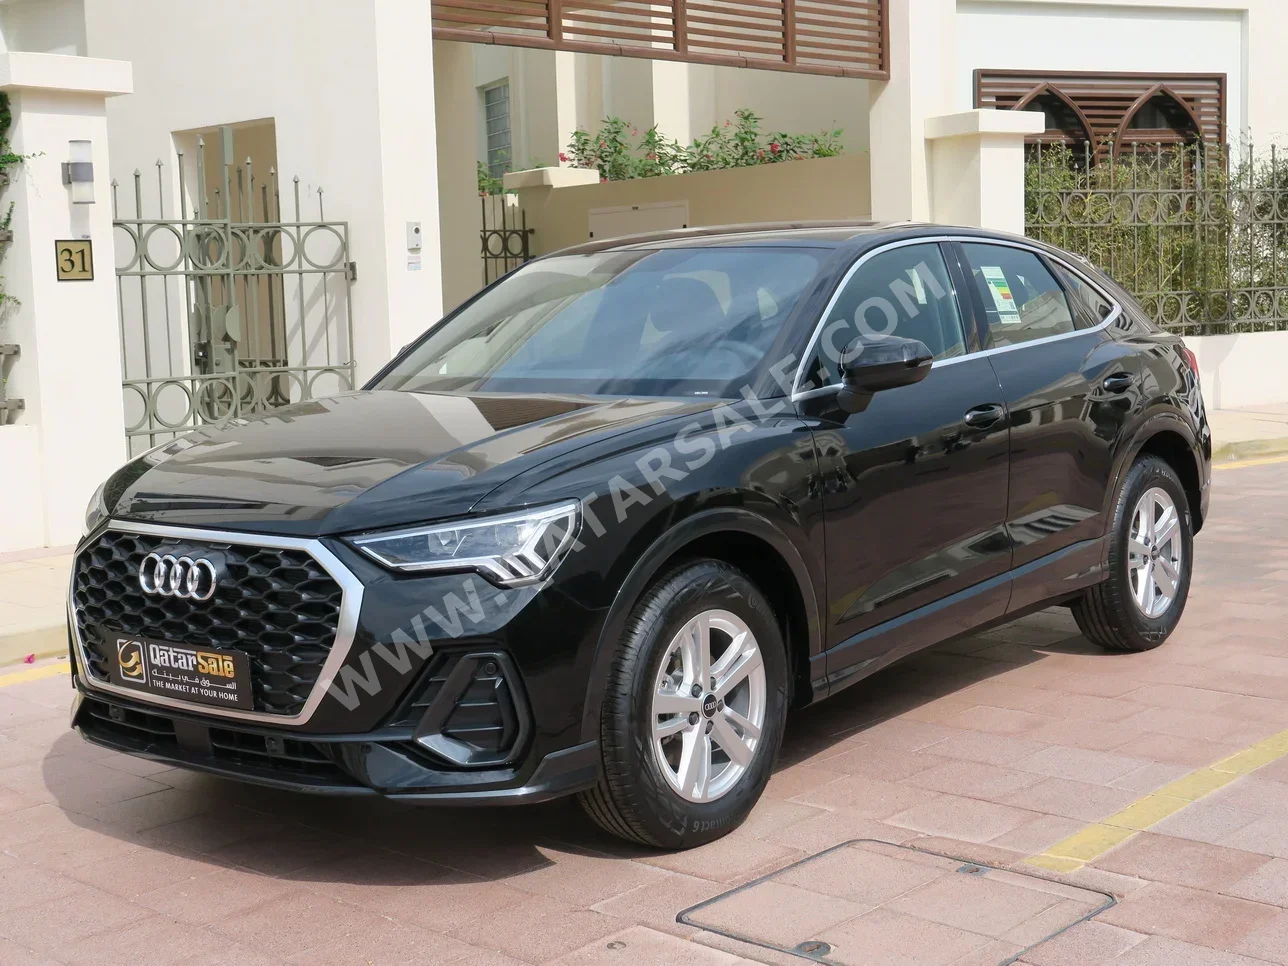 Audi  Q3  35 TFSI  2023  Automatic  0 Km  4 Cylinder  Front Wheel Drive (FWD)  SUV  Black  With Warranty